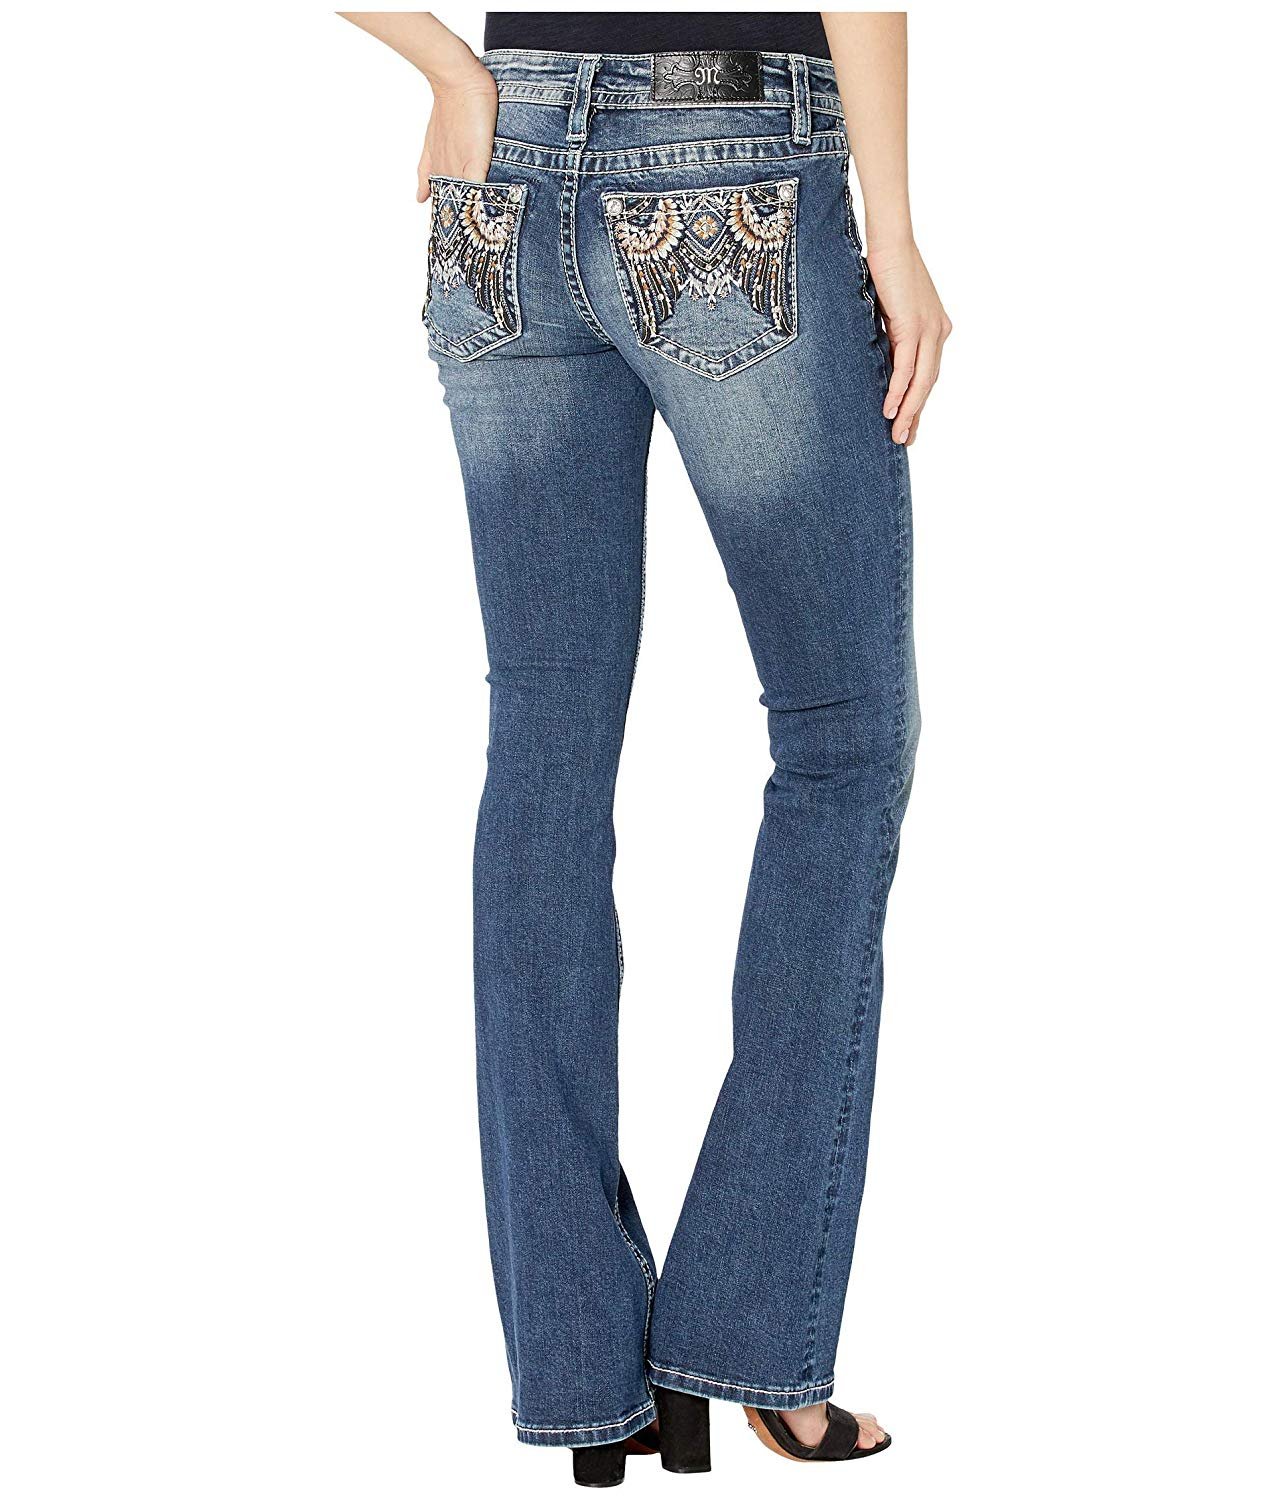 Tribal Style Bootcut Jeans